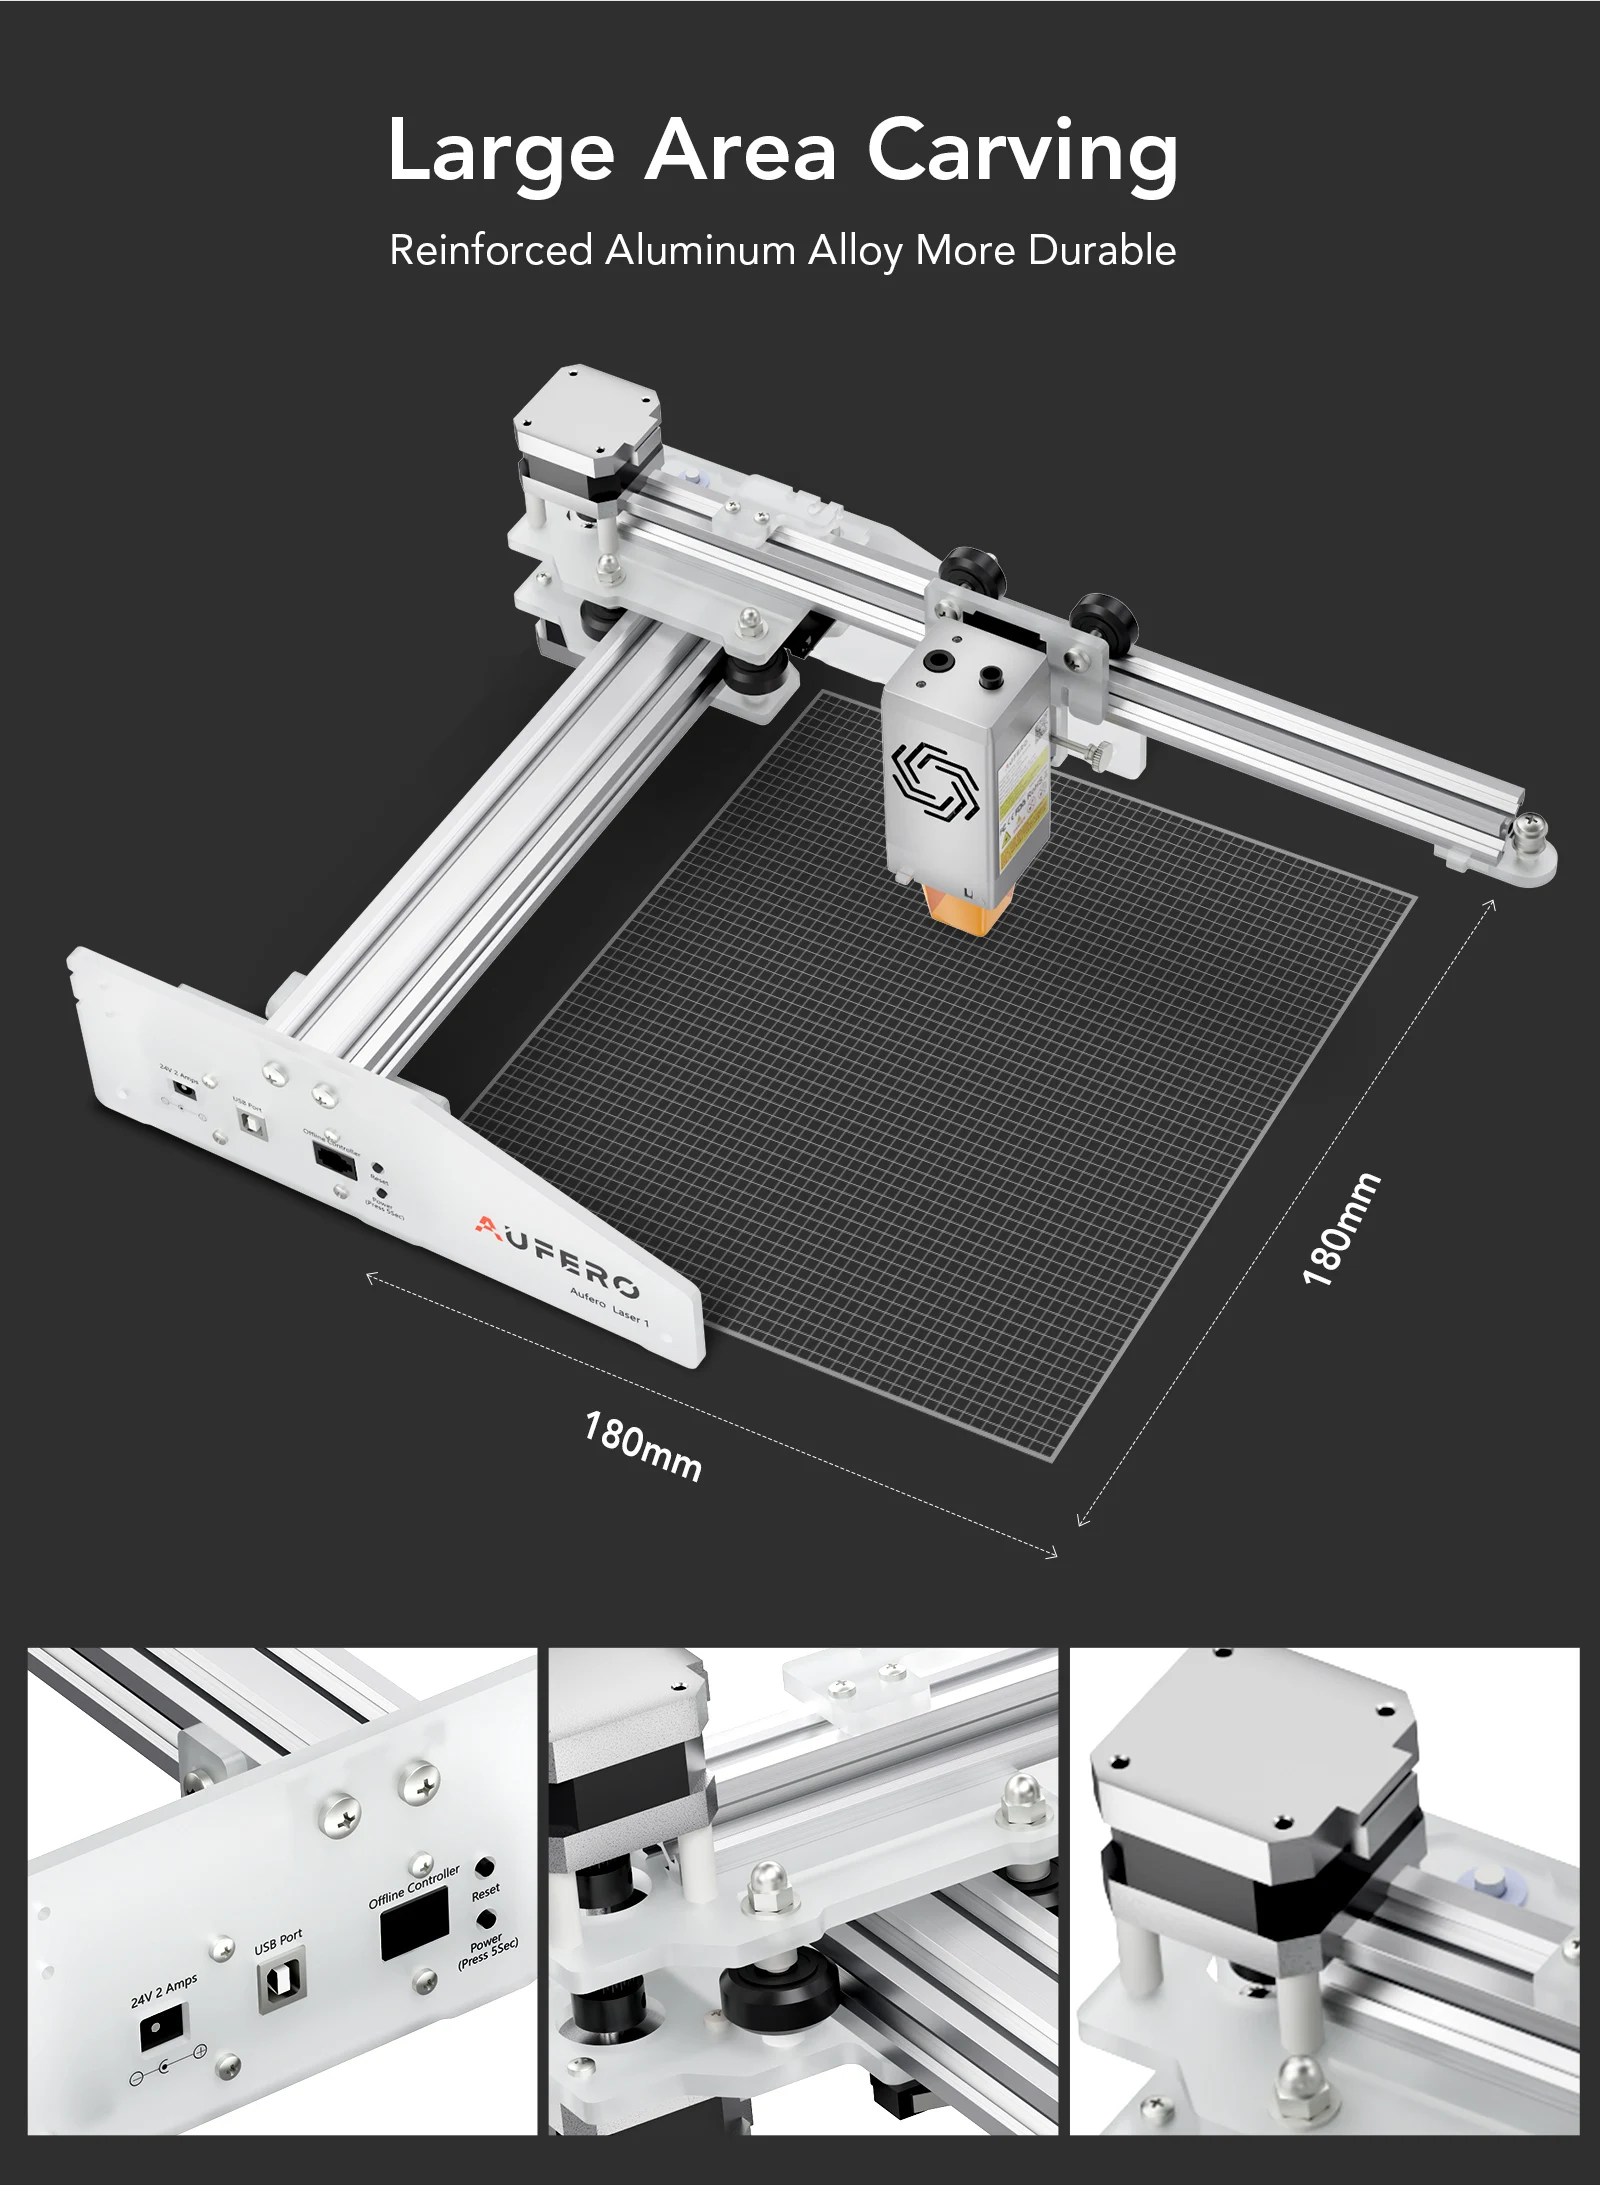 Aufero 2  Laser Engraver Machine Cutting Tools Aufero 1 10W PRINTER Desktop MILLING CUTTER With Y-axis Engraving Area 390x800mm enlarge